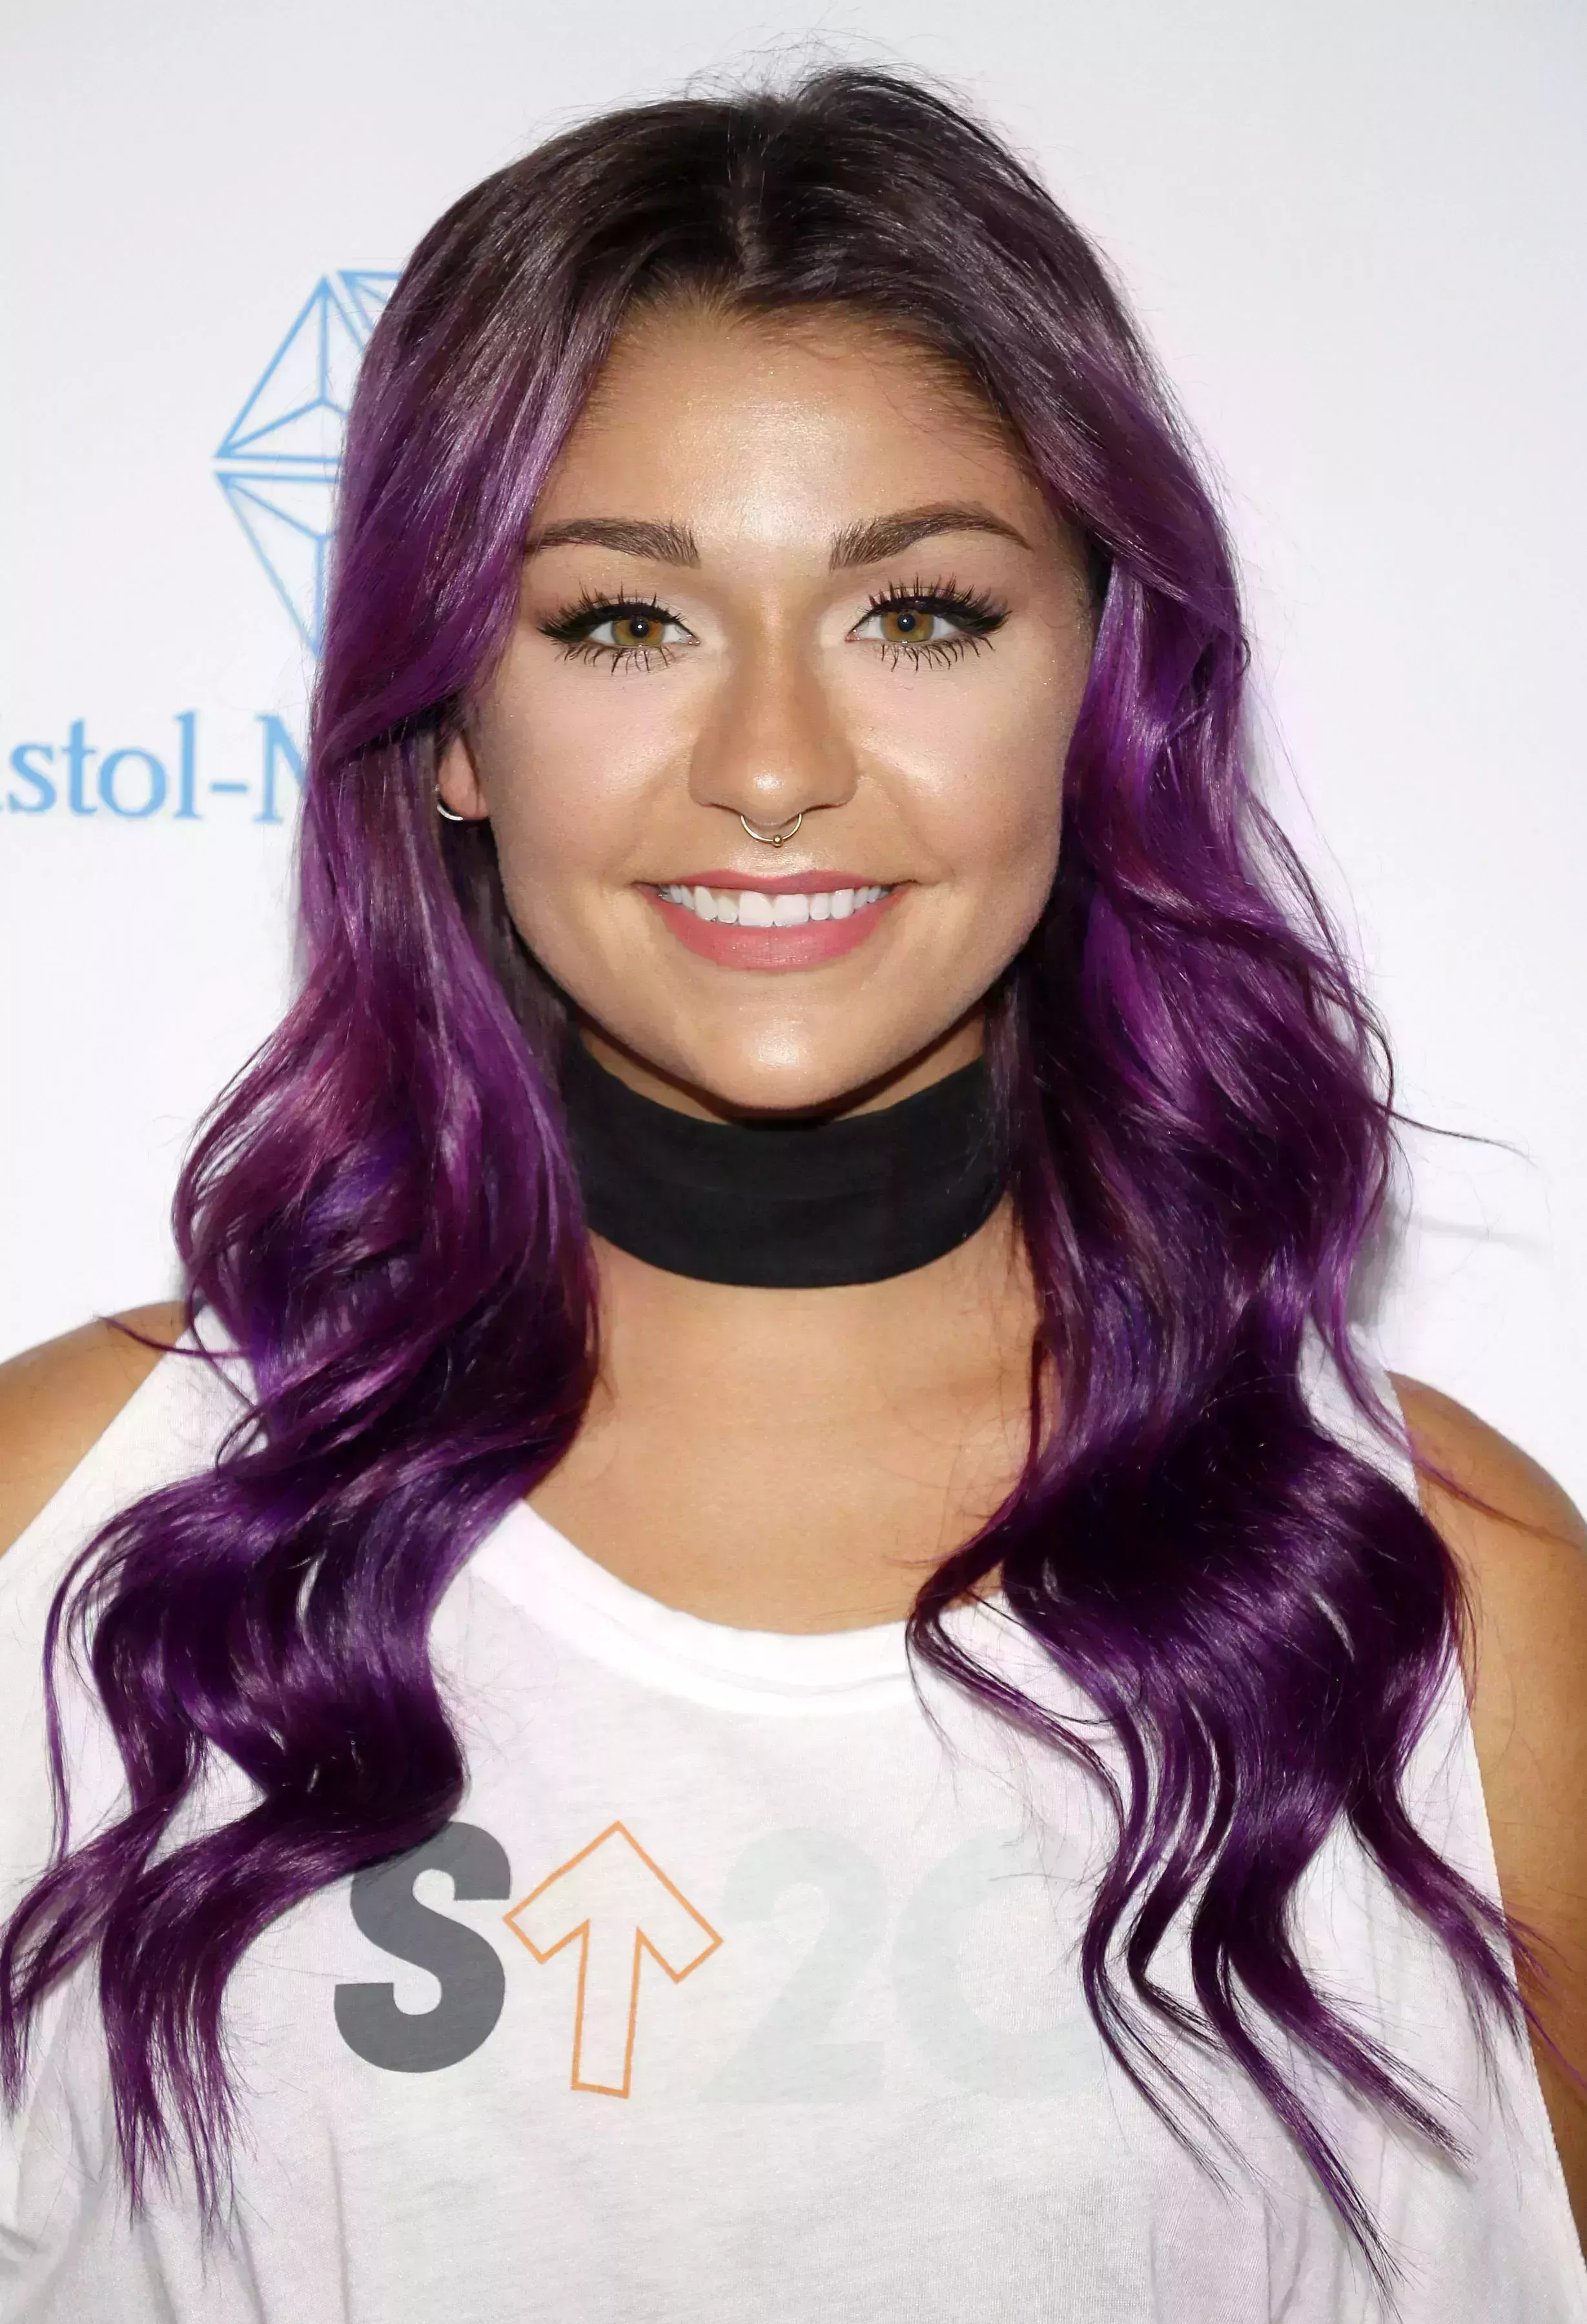 Andrea Russett’s Dark Brown Hair with Purple Highlights